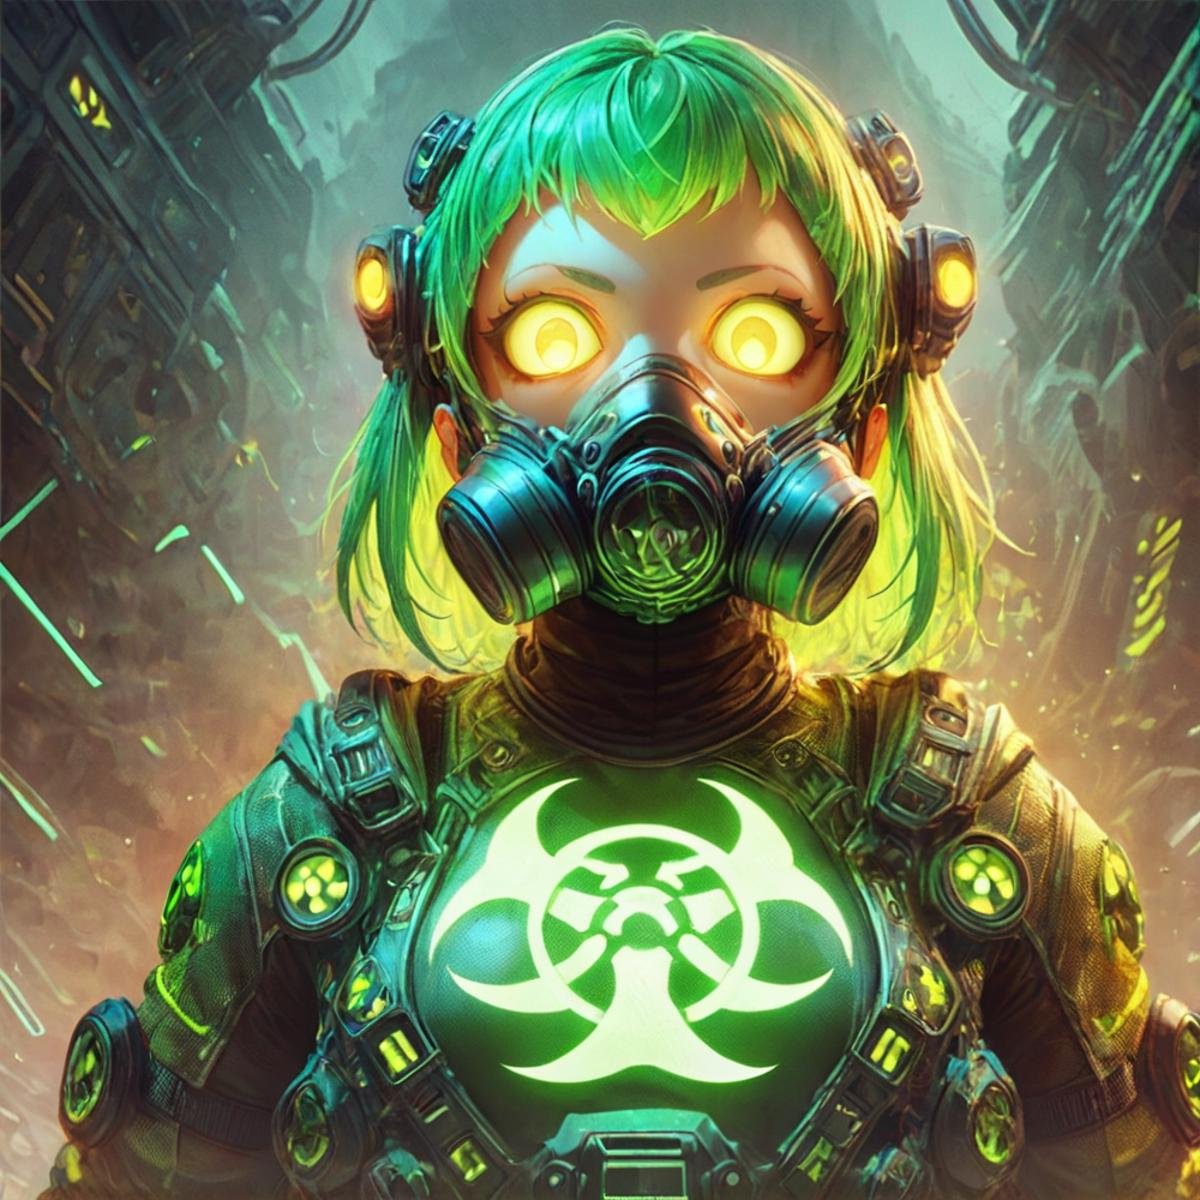 score_9, score_8_up, score_7_up, <lora:nuclearhazard_Pony:0.8>nuclearhazard,girl,solo,,see-trought clothes,glowing eyes,short glowing bright green hair,front view,simetric,eye focus,gasmask on mouth